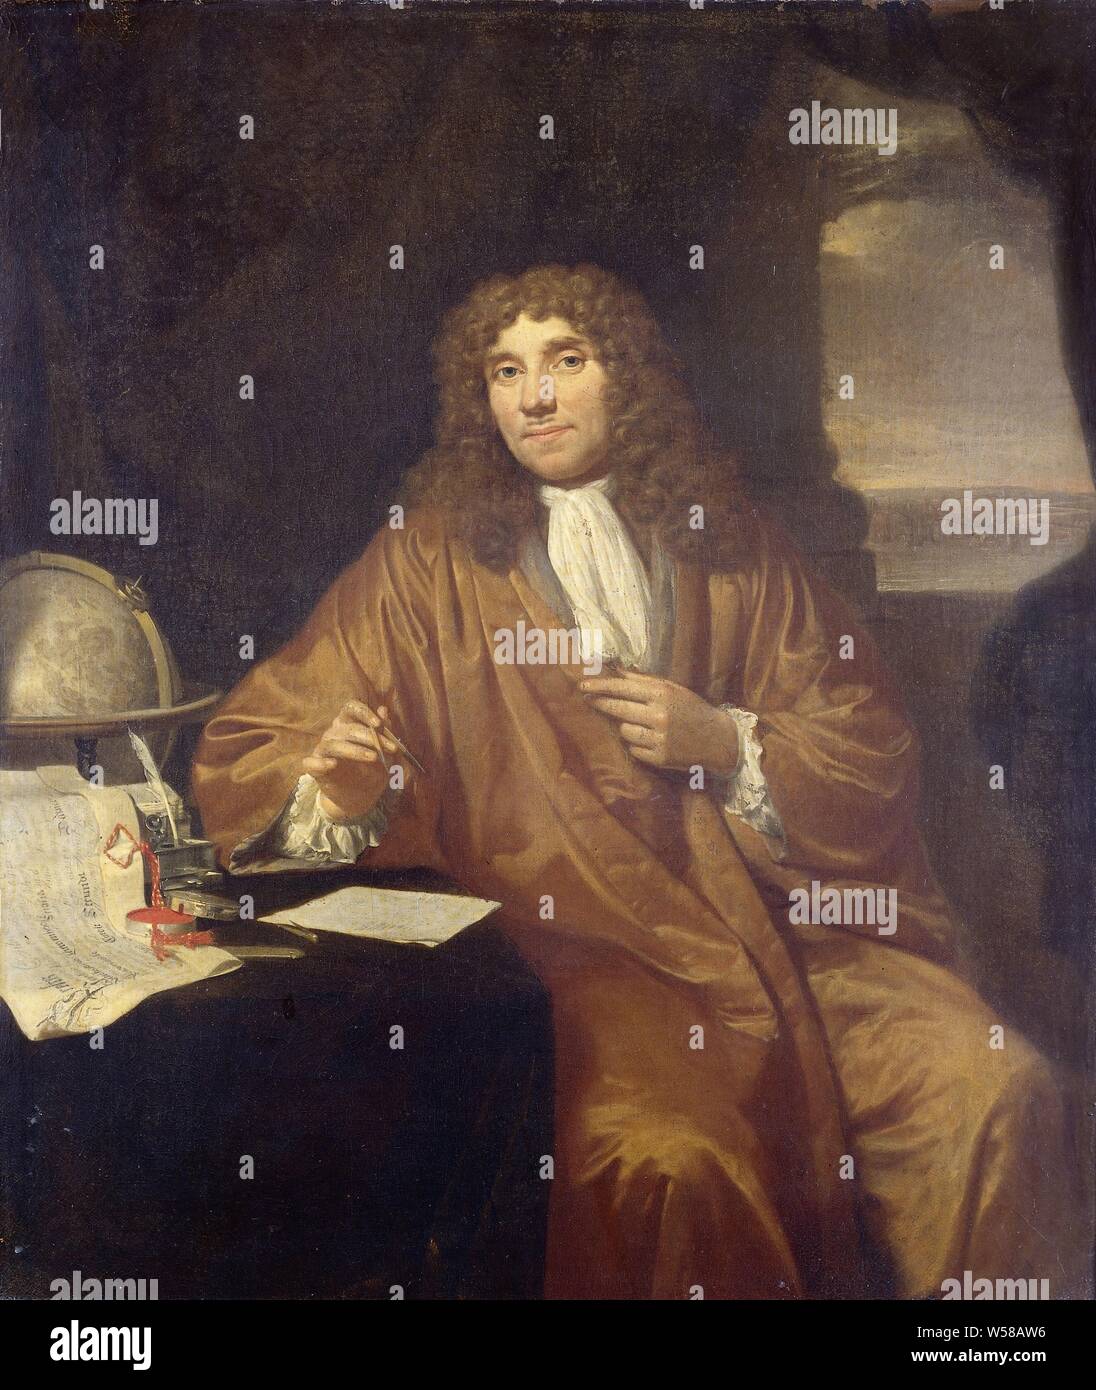 Portrait of Anthonie van Leeuwenhoek, Natural Philosopher and Zoologist in Delft, Portrait of Anthonie van Leeuwenhoek (1632-1723), physicist in Delft. Knee-piece sitting at a writing table with a certificate of his appointment as a member of the Royal Society in London by Charles II. Furthermore, a globe and an ink set, he holds a compass, Delft, Anthony van Leeuwenhoek, Jan Verkolje (I), 1680 - 1686, canvas, oil paint (paint), h 56 cm × w 47.5 cm Stock Photo